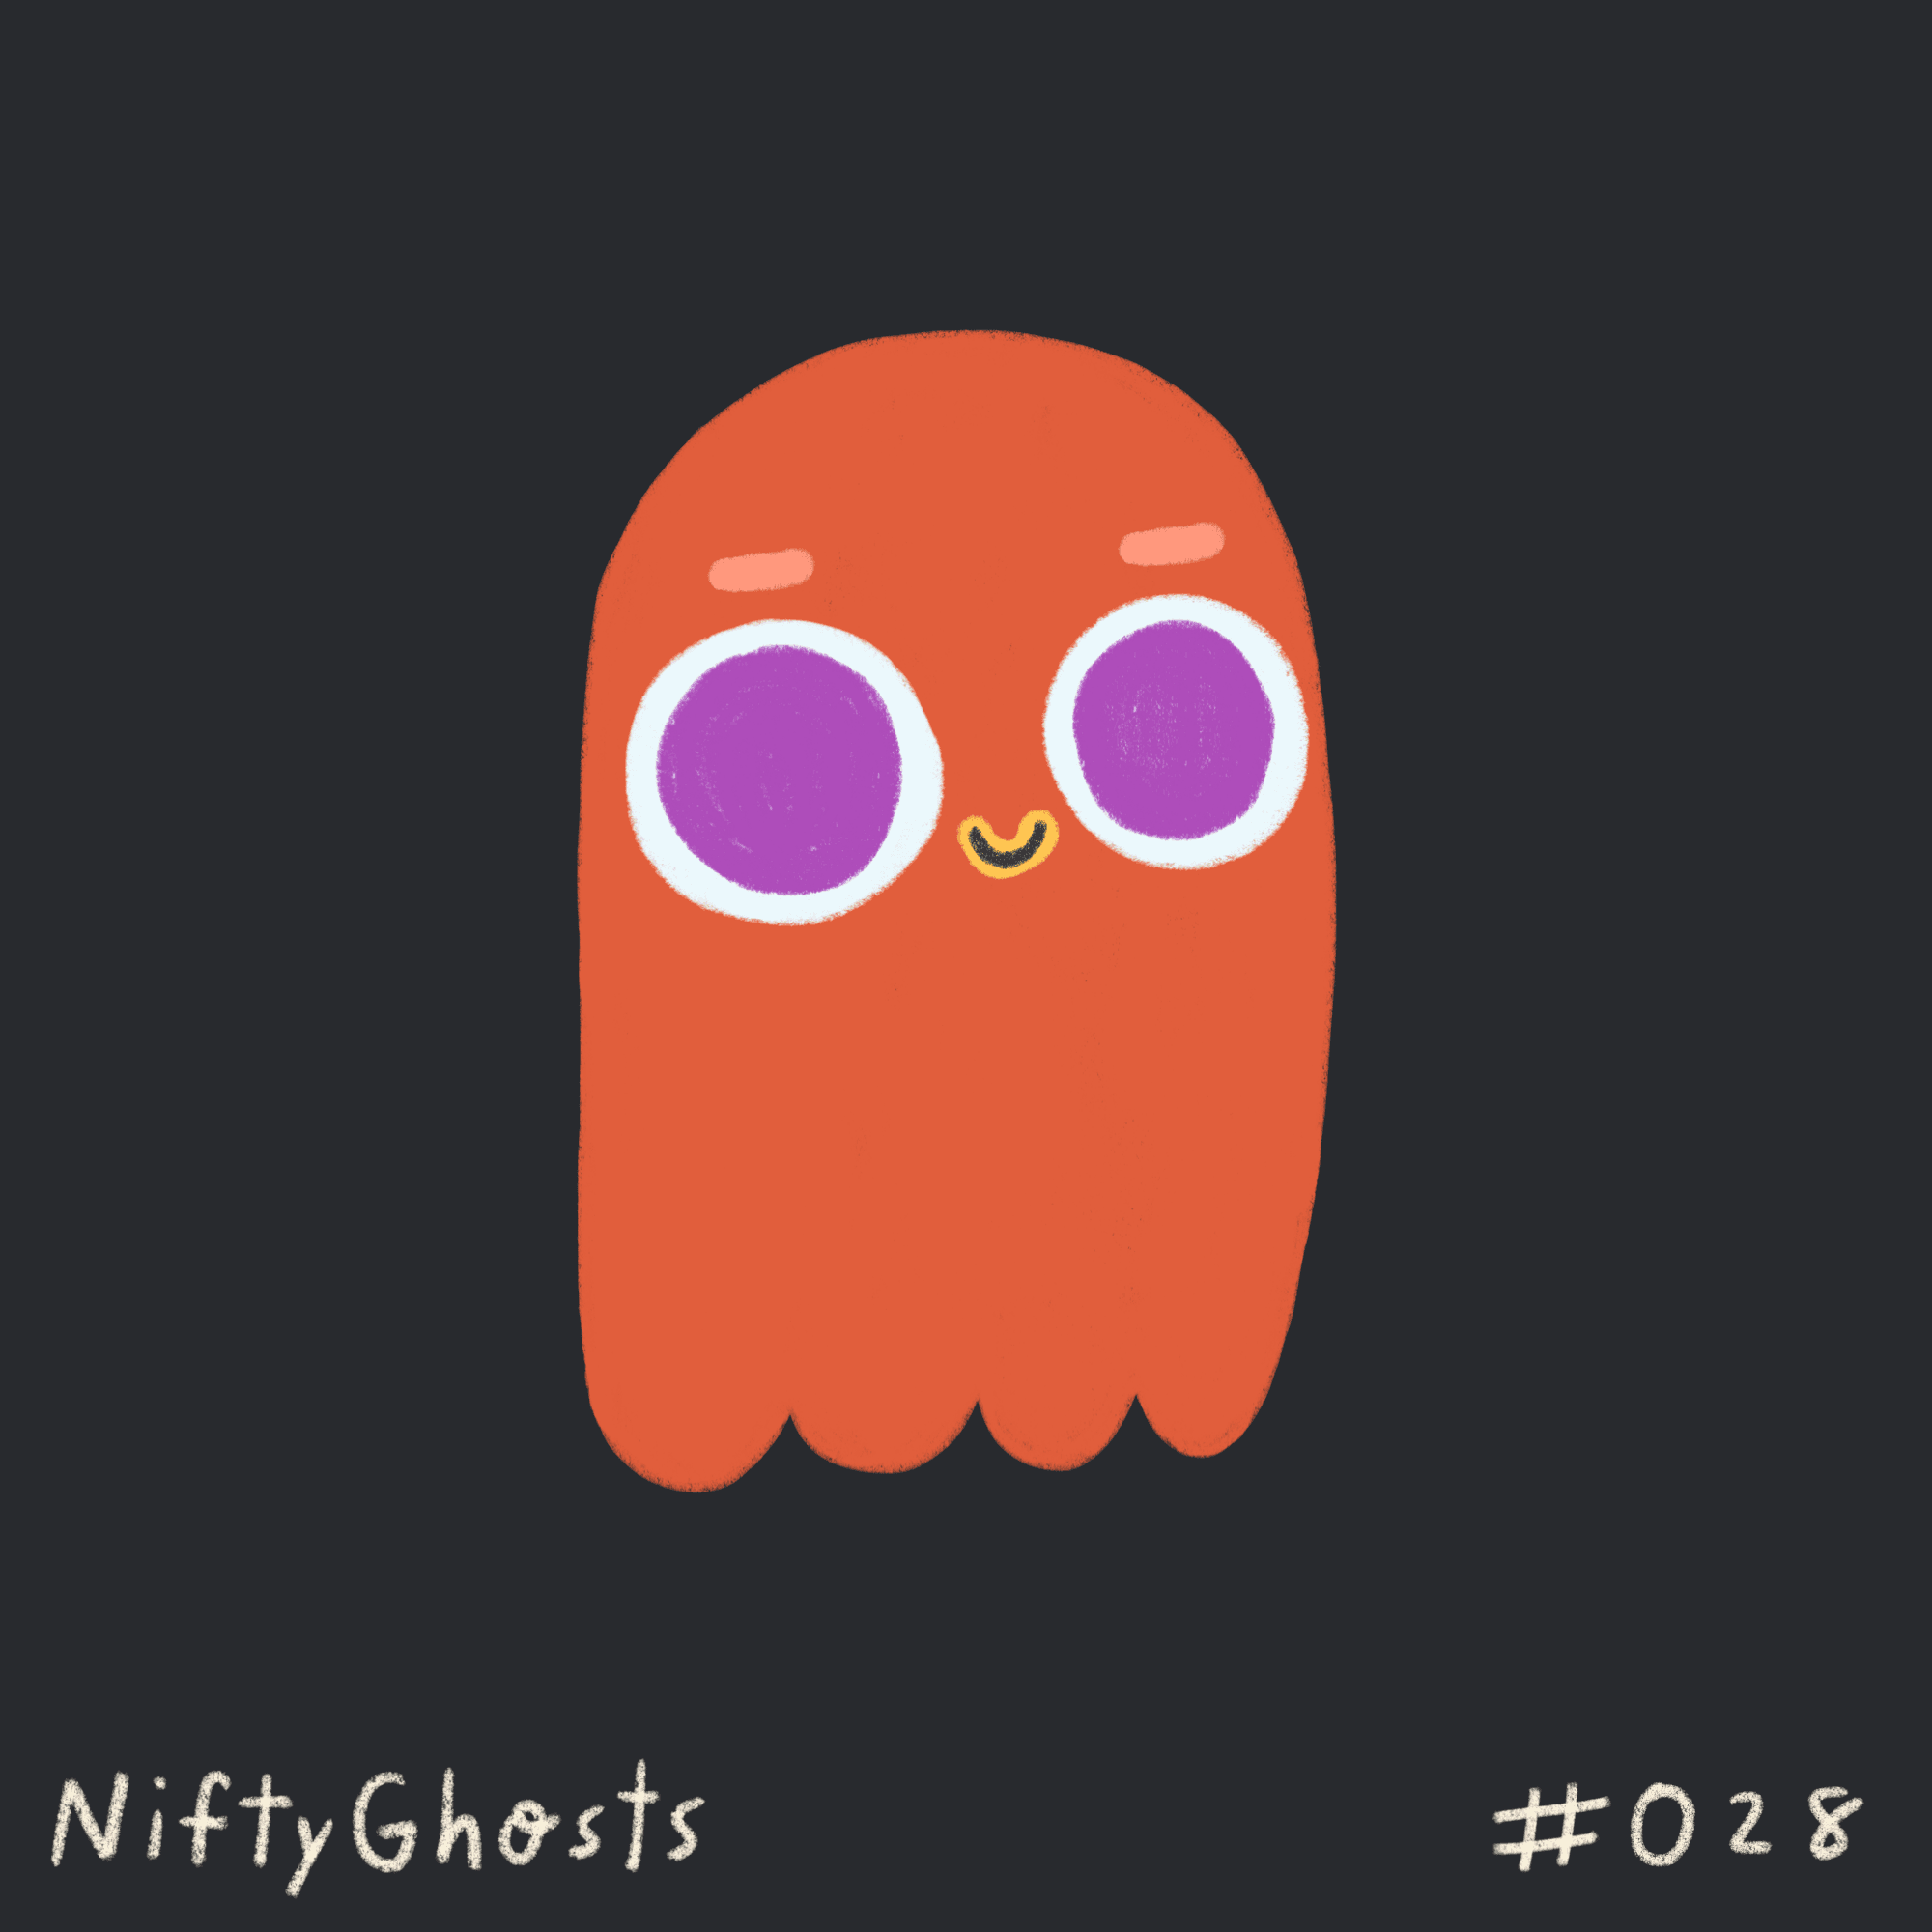 Nifty Ghost #028